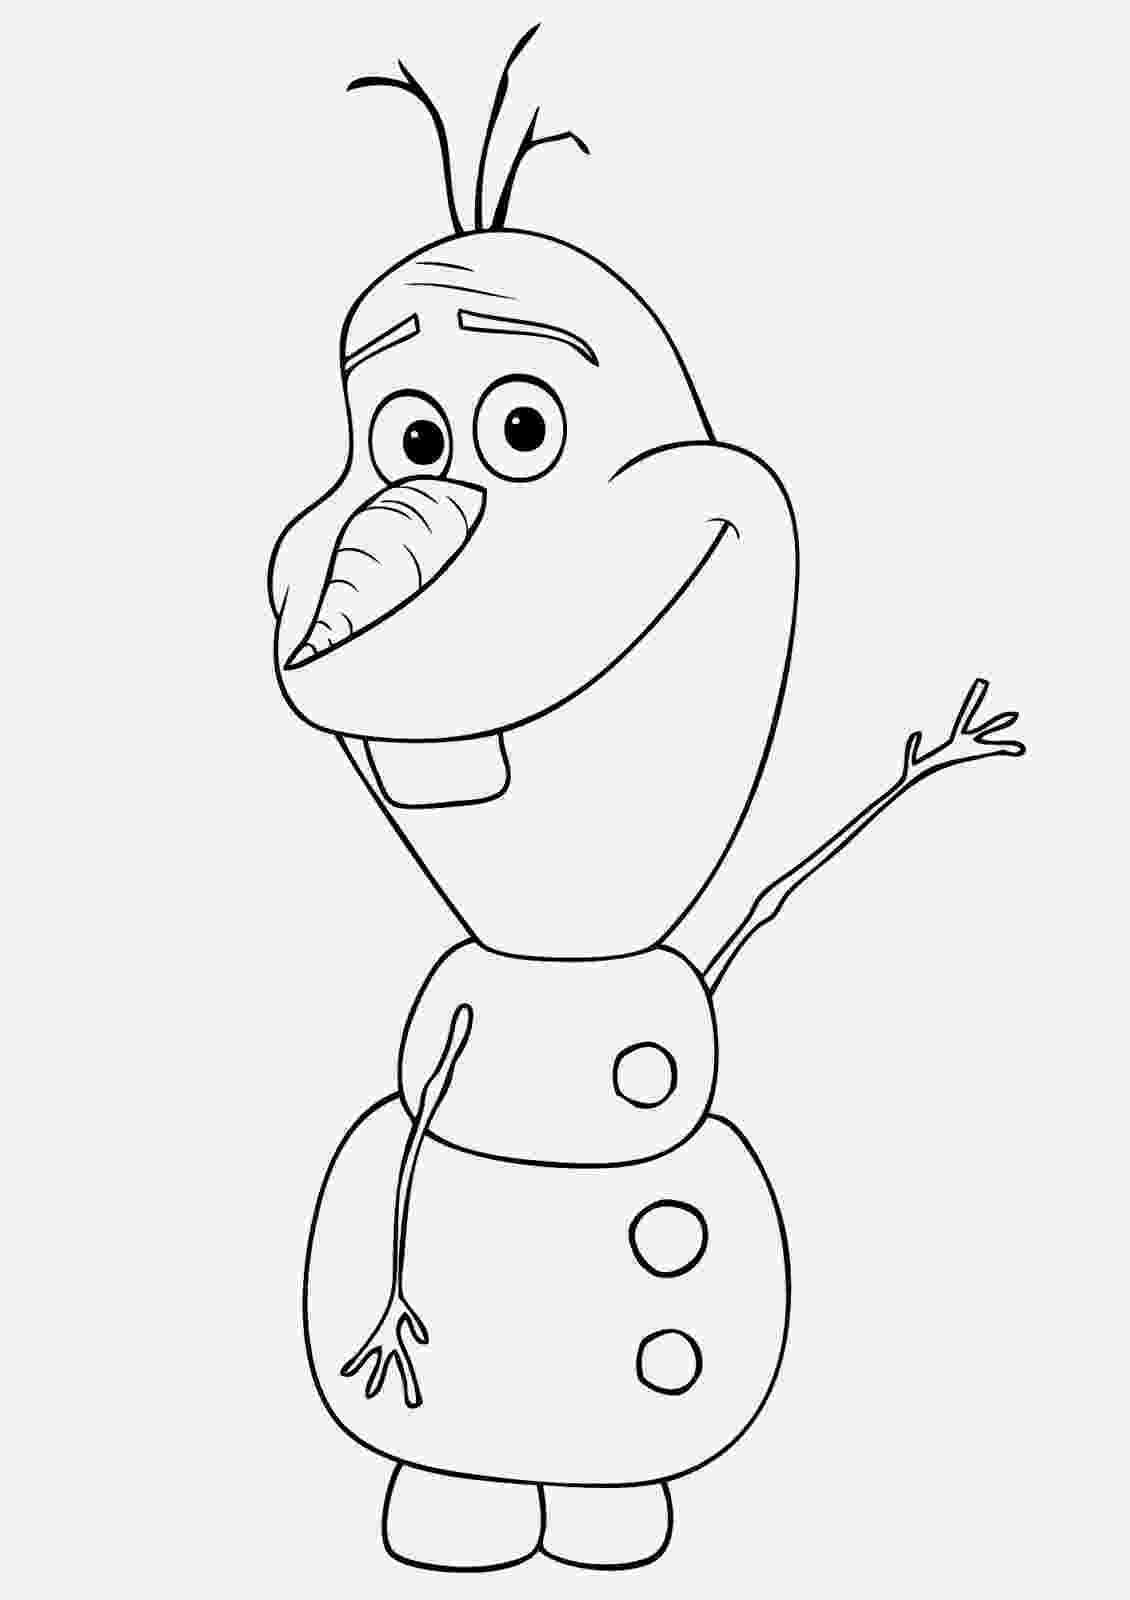 olaf pictures to print cheerful disney frozen olaf coloring pages coloring pages to olaf pictures print 